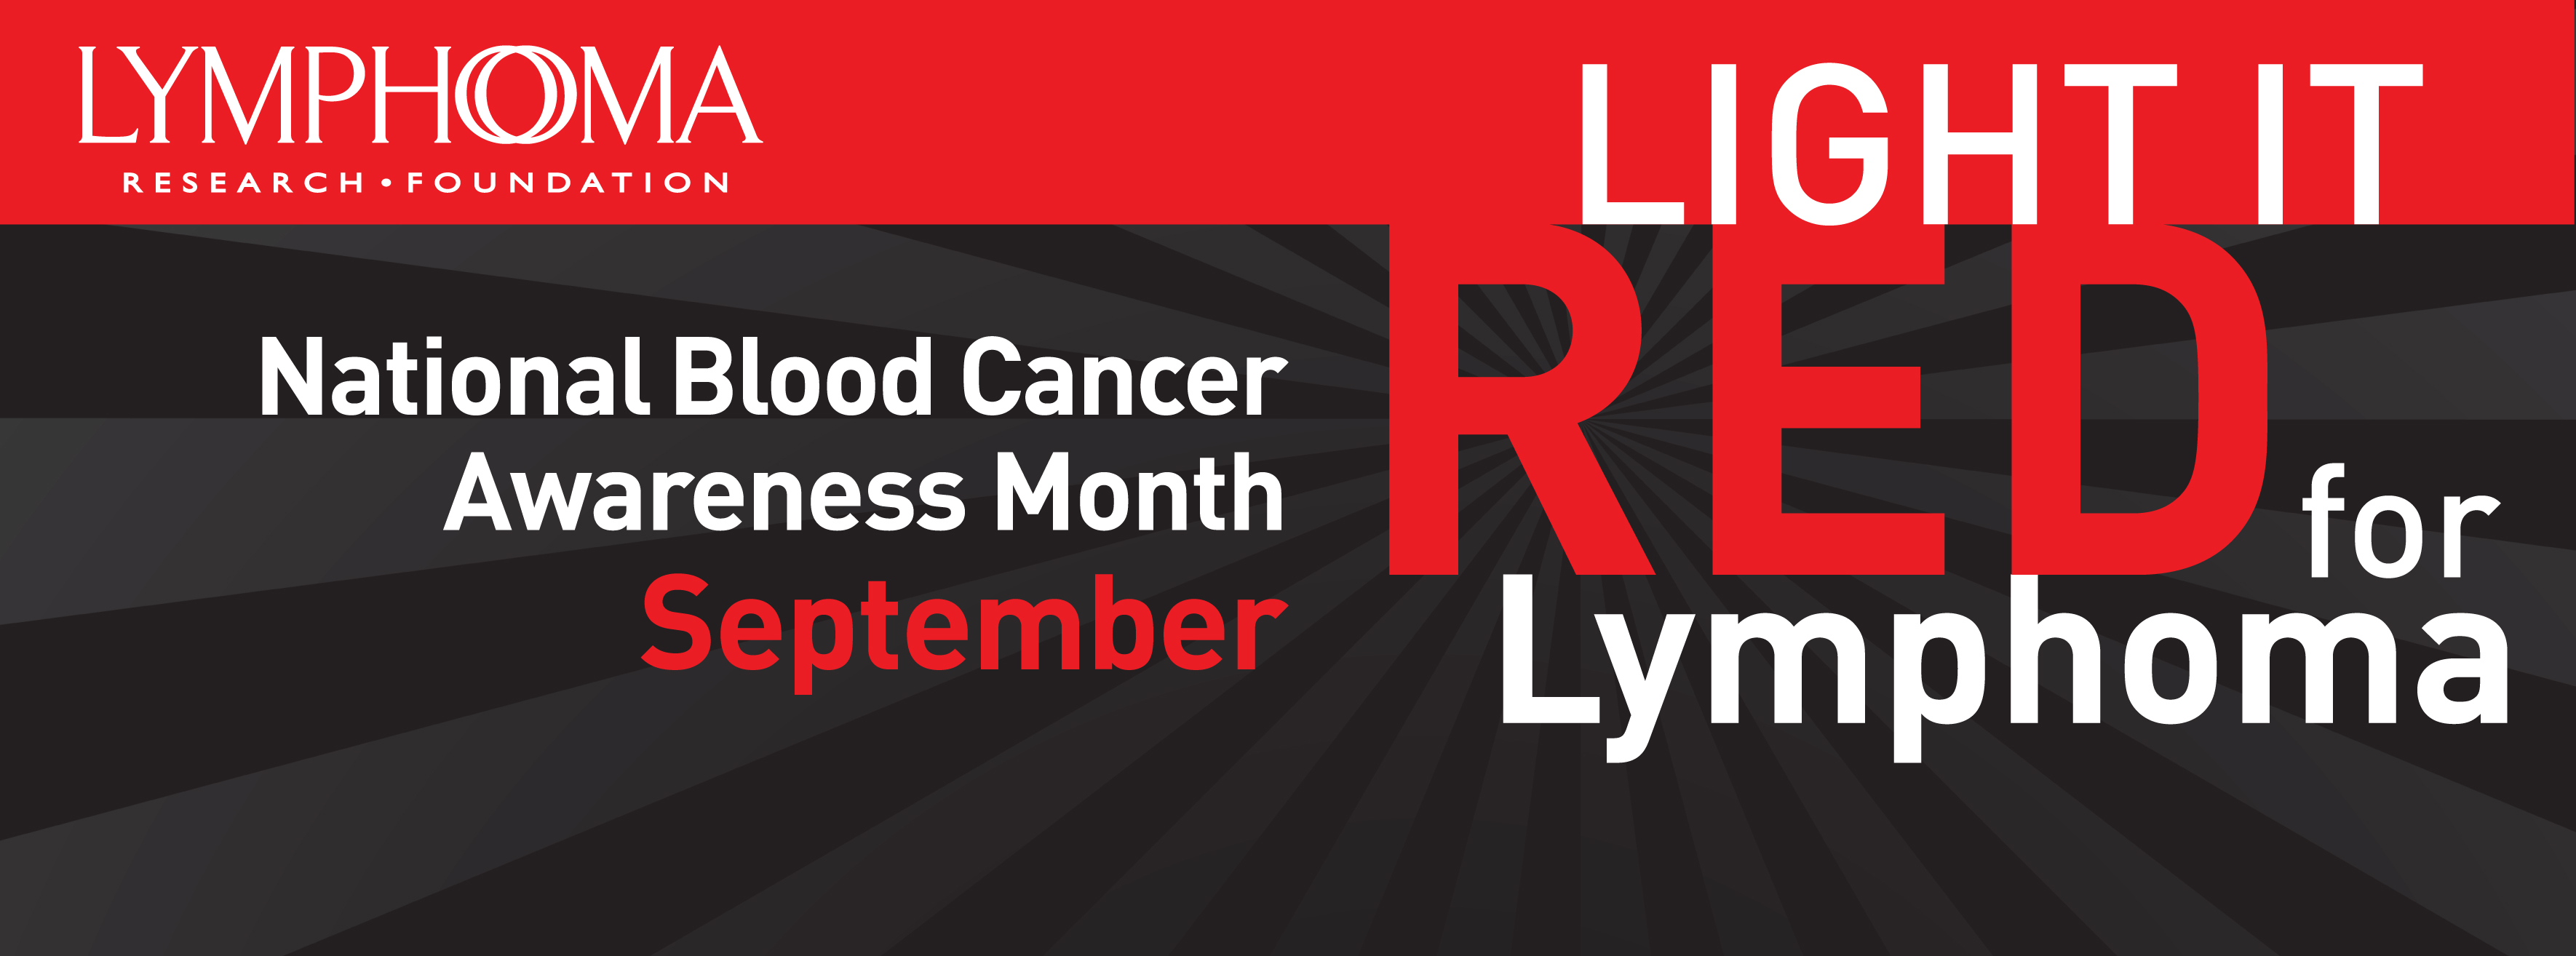 Lymphoma Research Foundation Recognizes Blood Cancer Awareness Month With Light it Red for Lymphoma Campaign